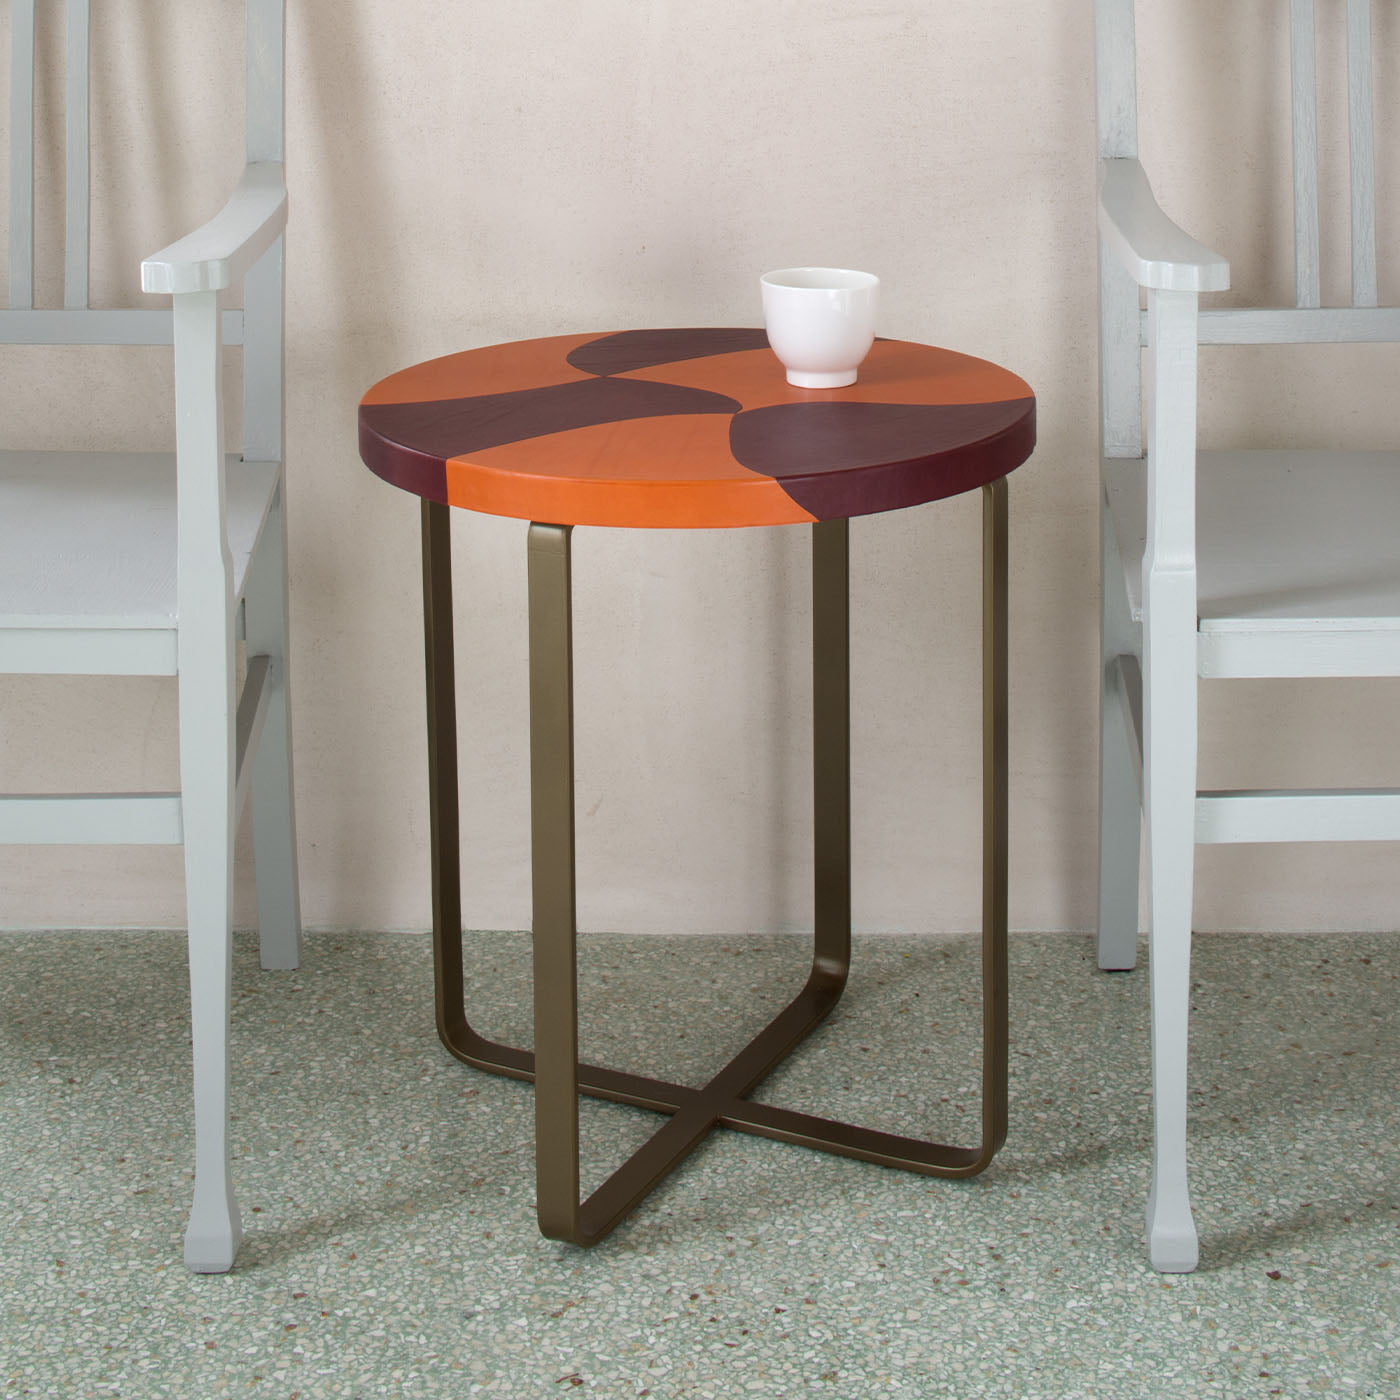 Isole Tigre Round Polychrome Side Table by Nestor Perkal - Alternative view 3